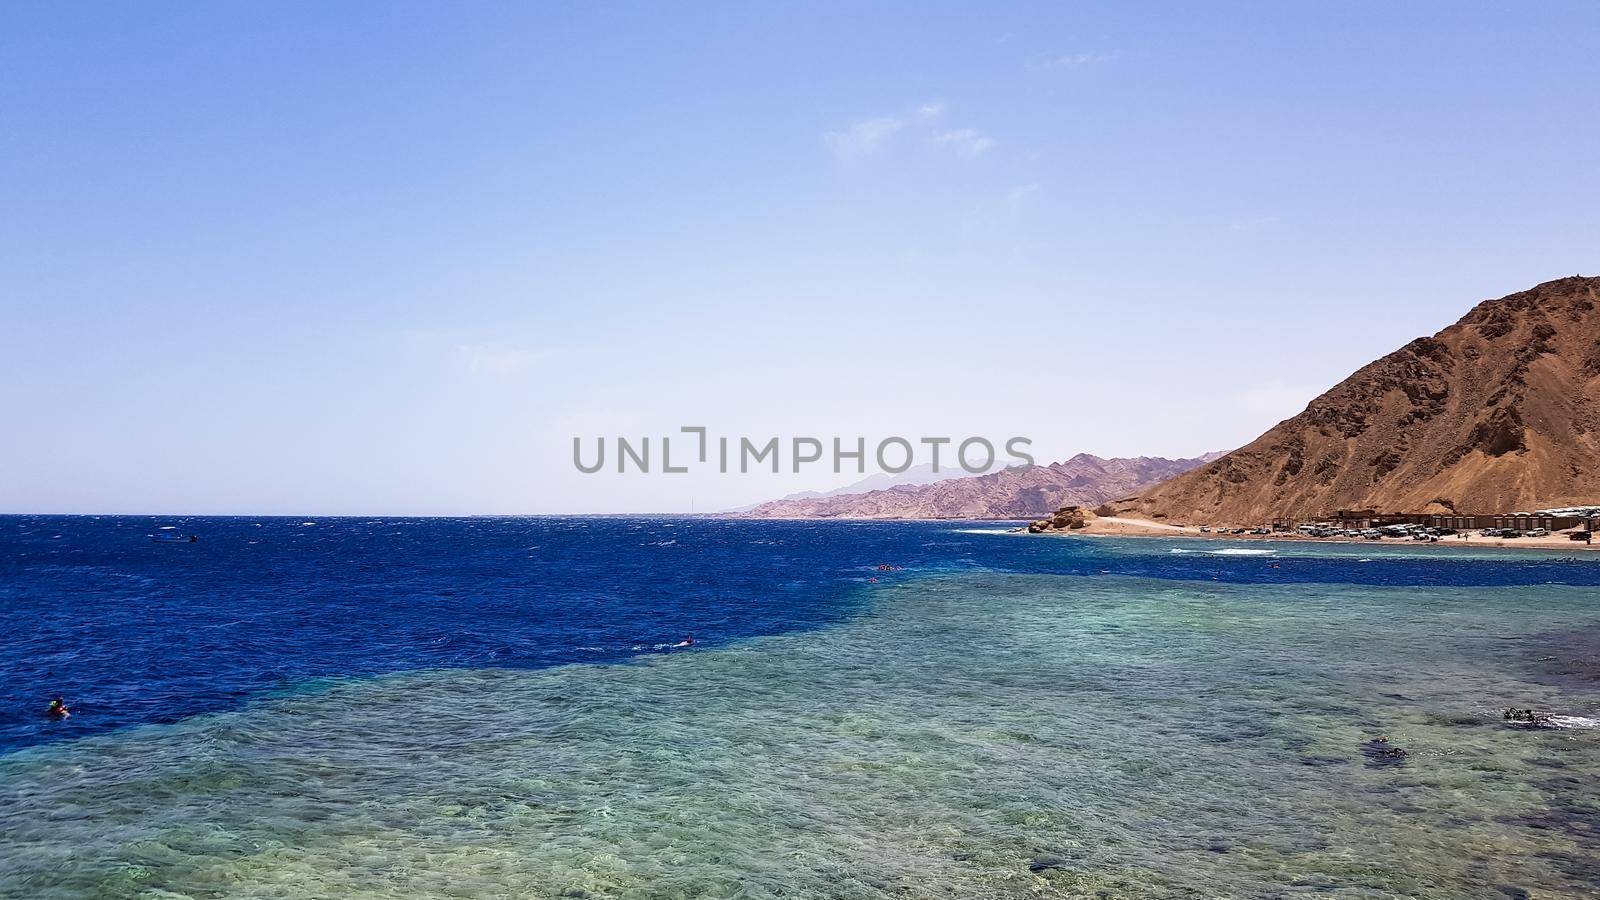 The Blue Hole is a popular diving spot in East Sinai. Sunny beach resort on the Red Sea in Dahab. A famous tourist destination near Sharm el Sheikh. Bright sunshine by Roshchyn